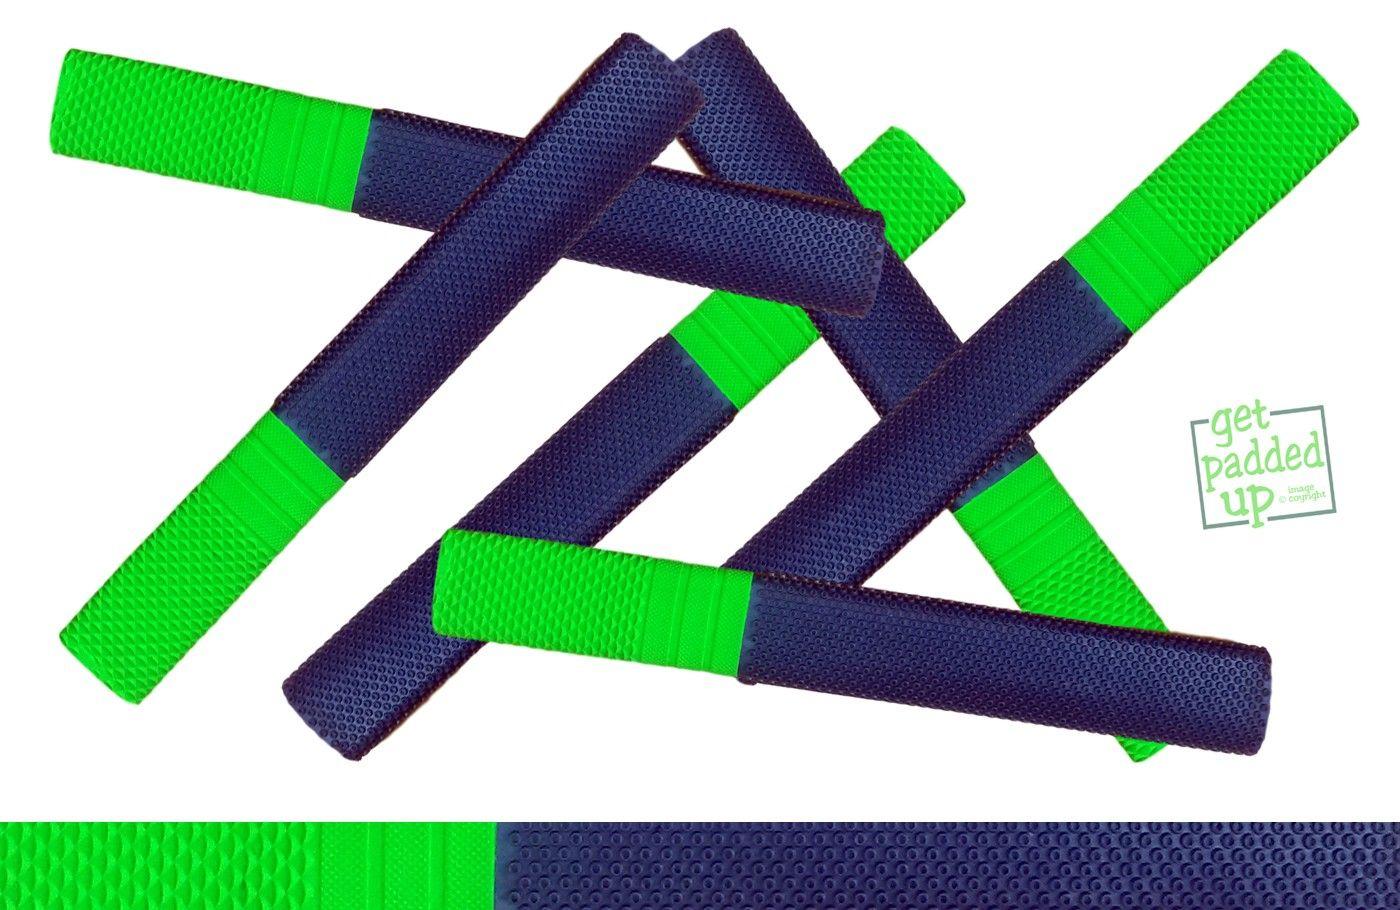 Lime Green and Blue Logo - getpaddeup `Trio` Octopus, Bands, Scale Cricket Bat Grip in Navy ...